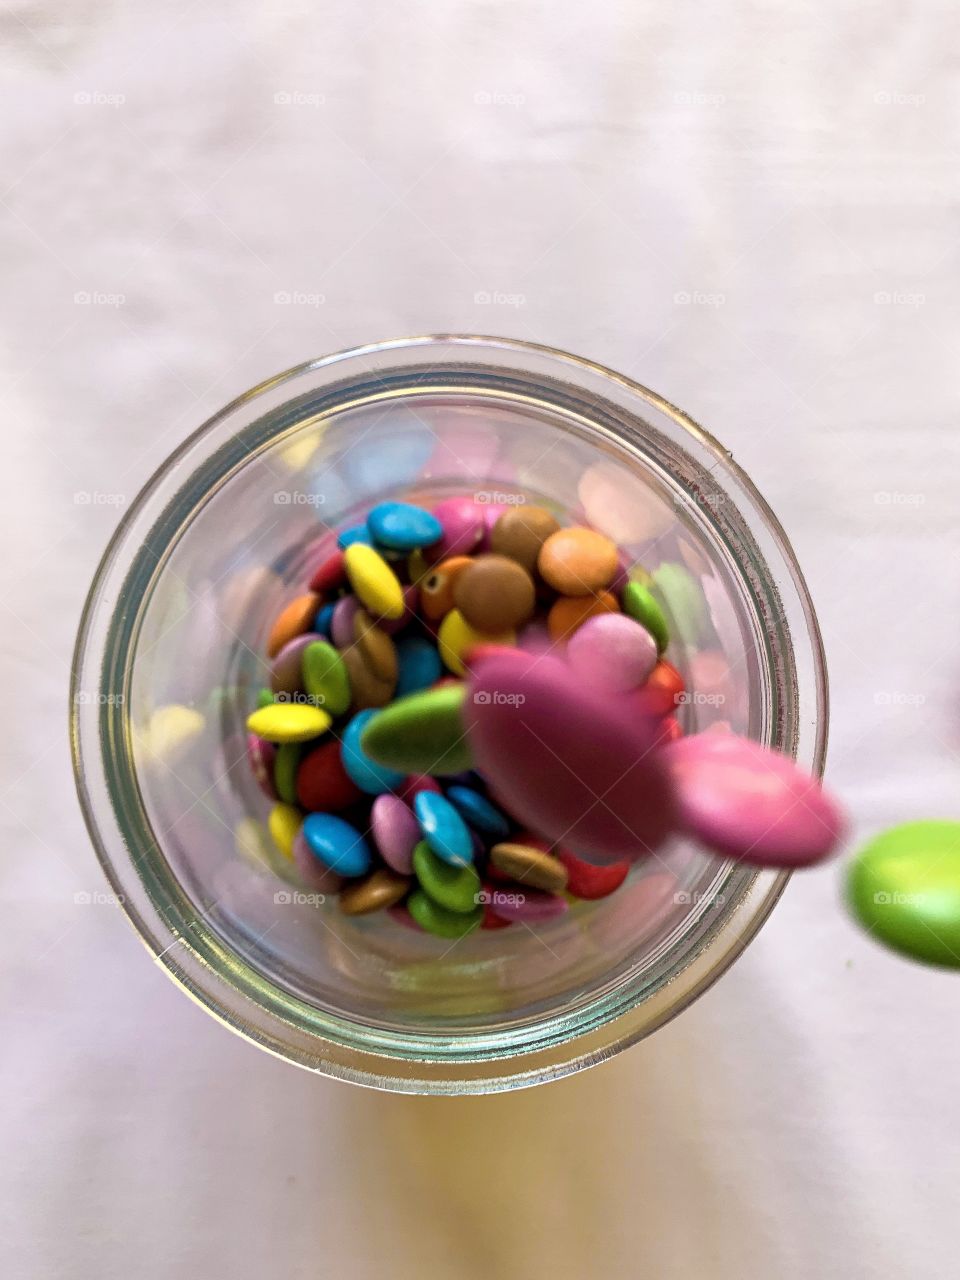 Clash of colours. Got to love the colourful smarties brighting up the container